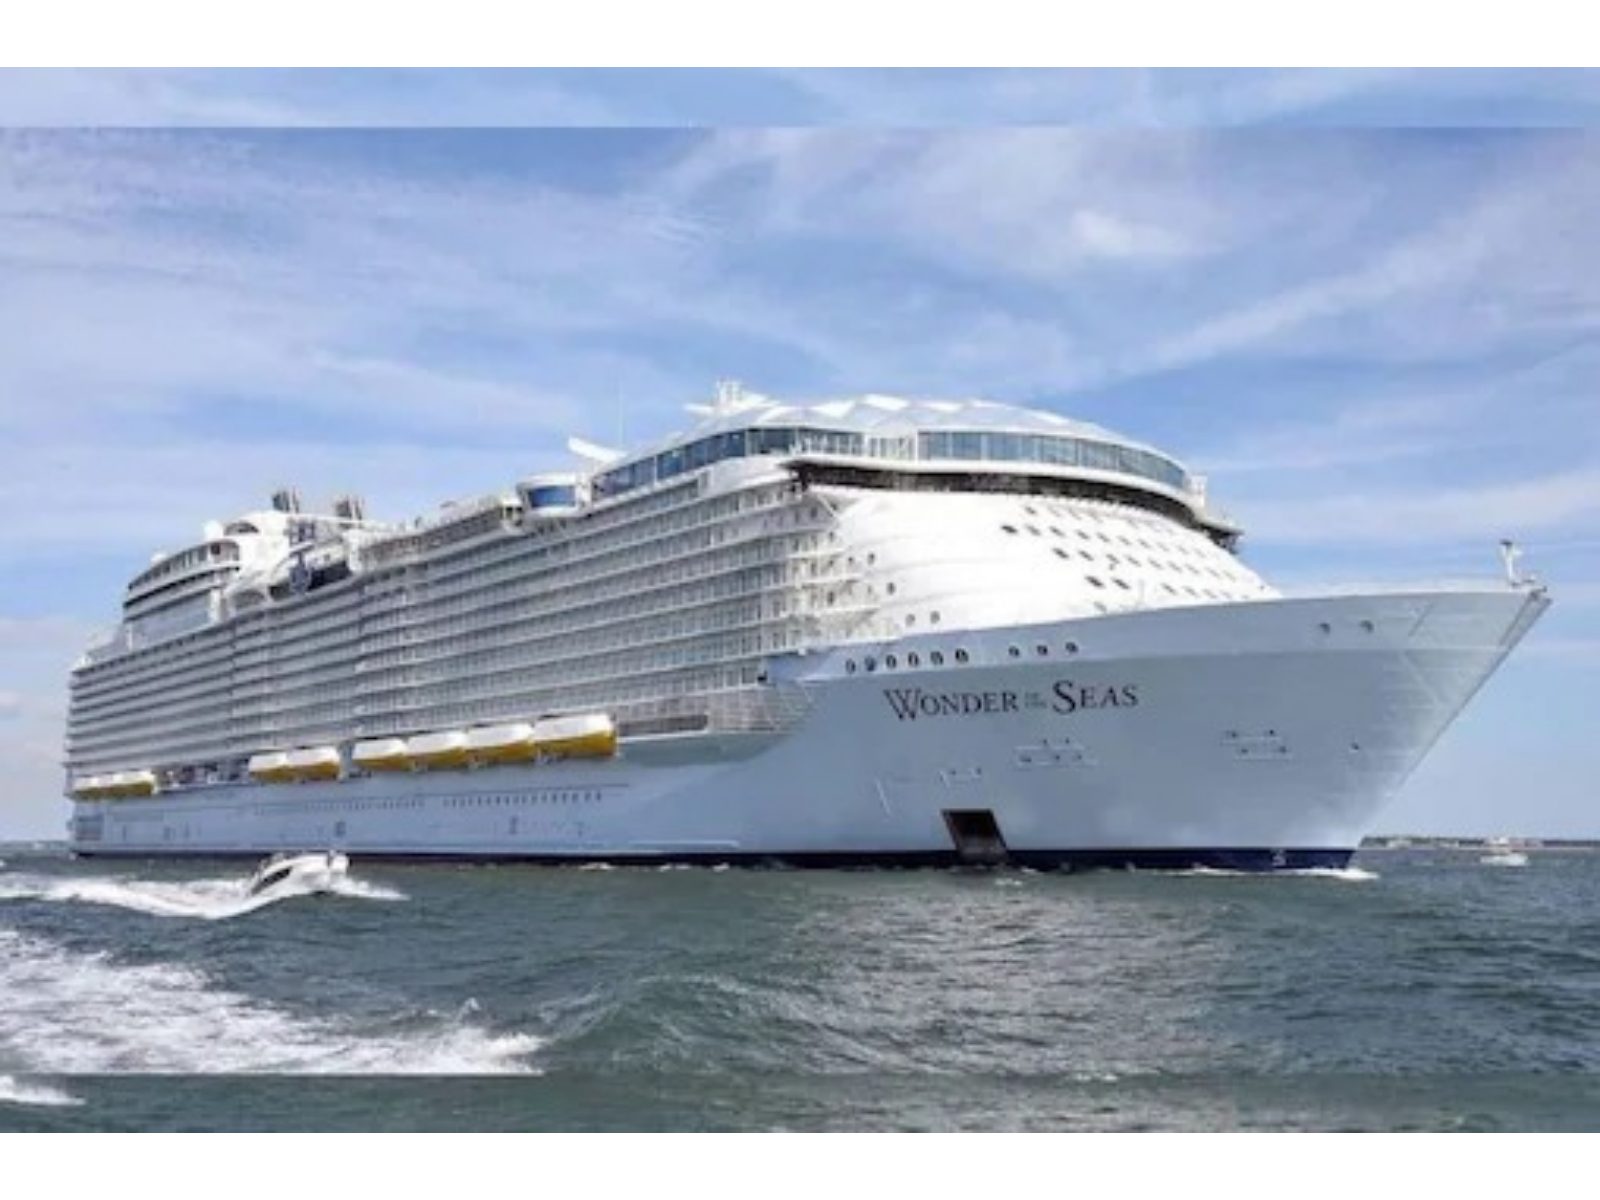 Largest cruise ship ever sets sail on inaugural voyage